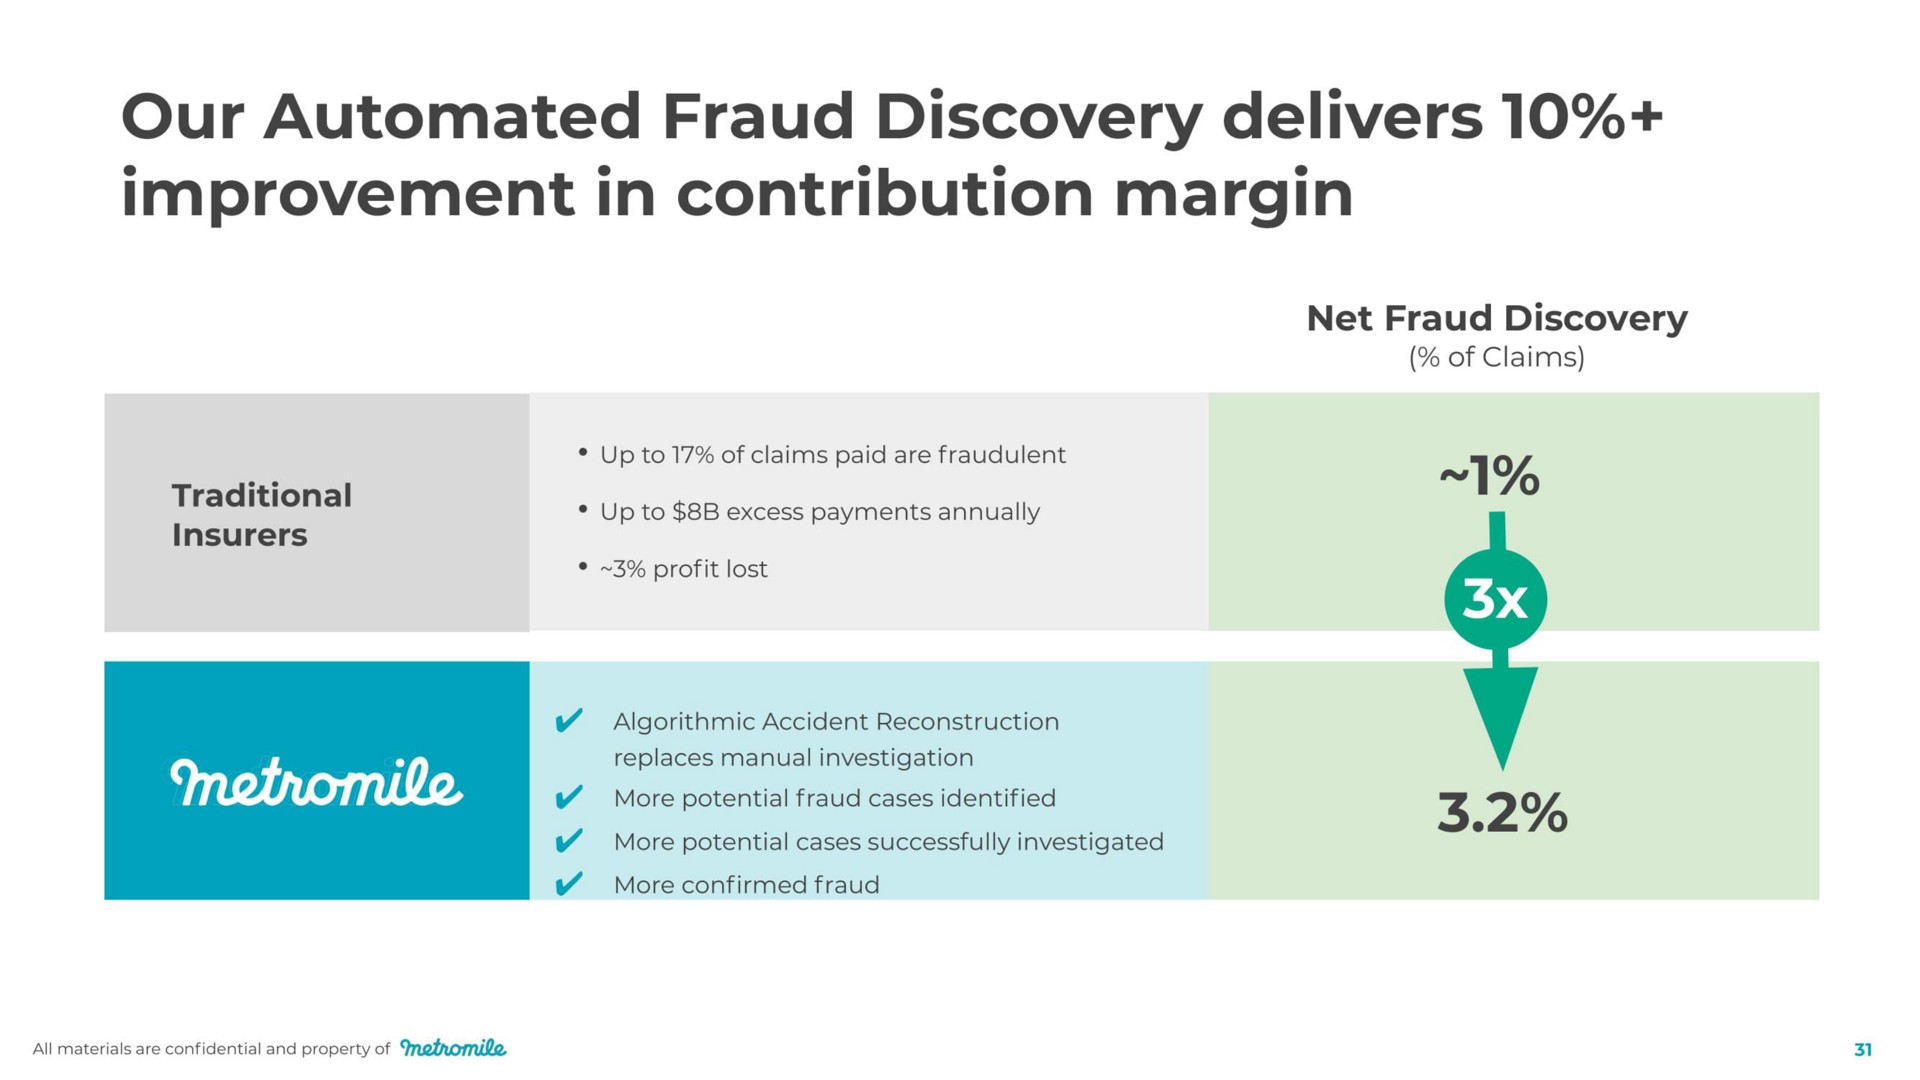 our fraud discovery delivers improvement in contribution margin | Metromile